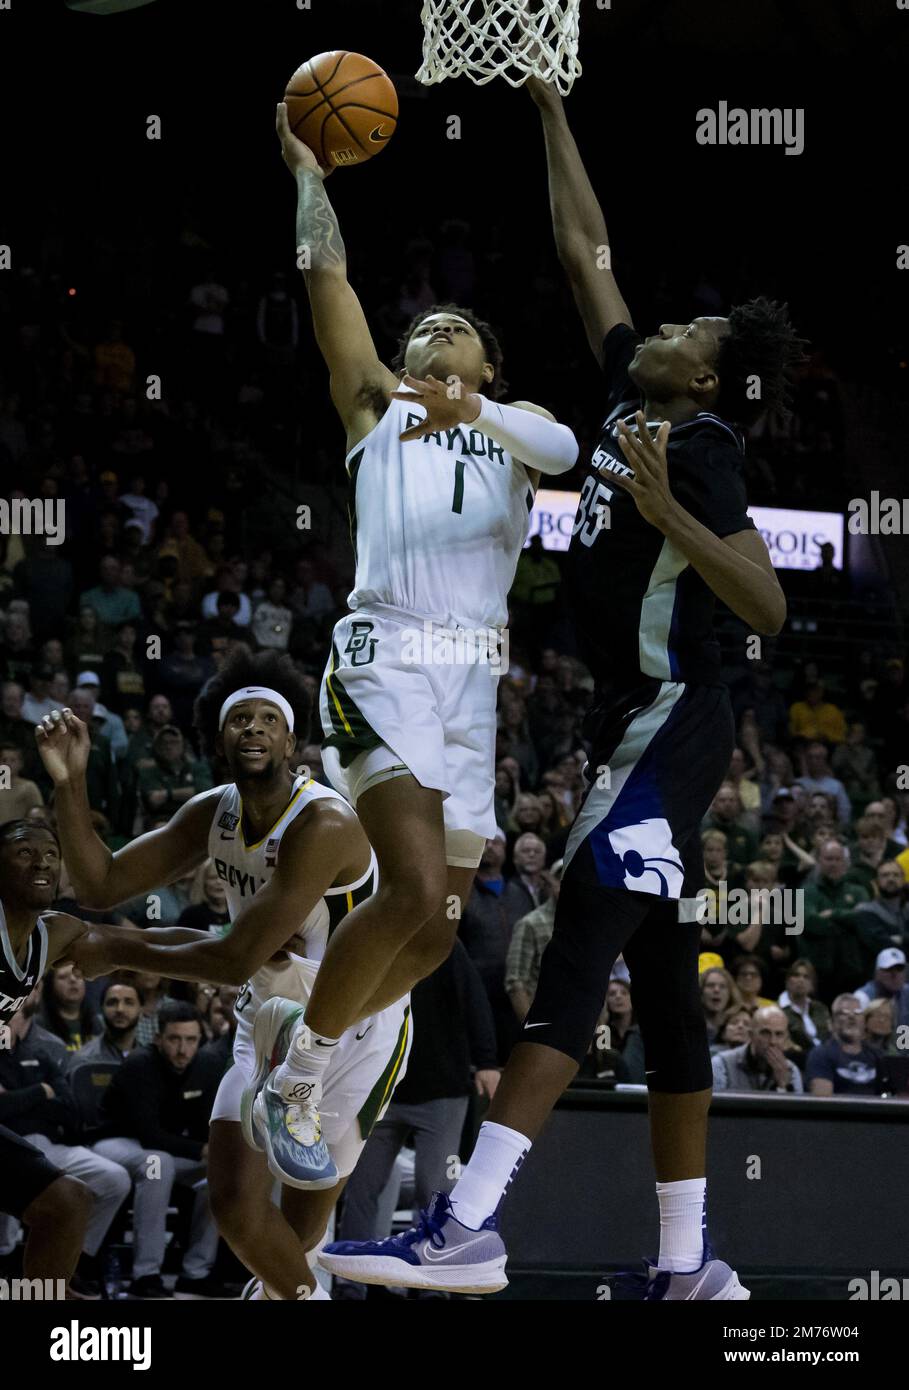 Waco, Texas, USA. 7th Jan, 2023. Baylor Bears guard Keyonte George (1) shoots the ball against Kansas State Wildcats forward Nae'Qwan Tomlin (35) during the 2nd half of the NCAA Basketball game between the Kansas State Wildcats and Baylor Bears at Ferrell Center in Waco, Texas. Matthew Lynch/CSM/Alamy Live News Stock Photo